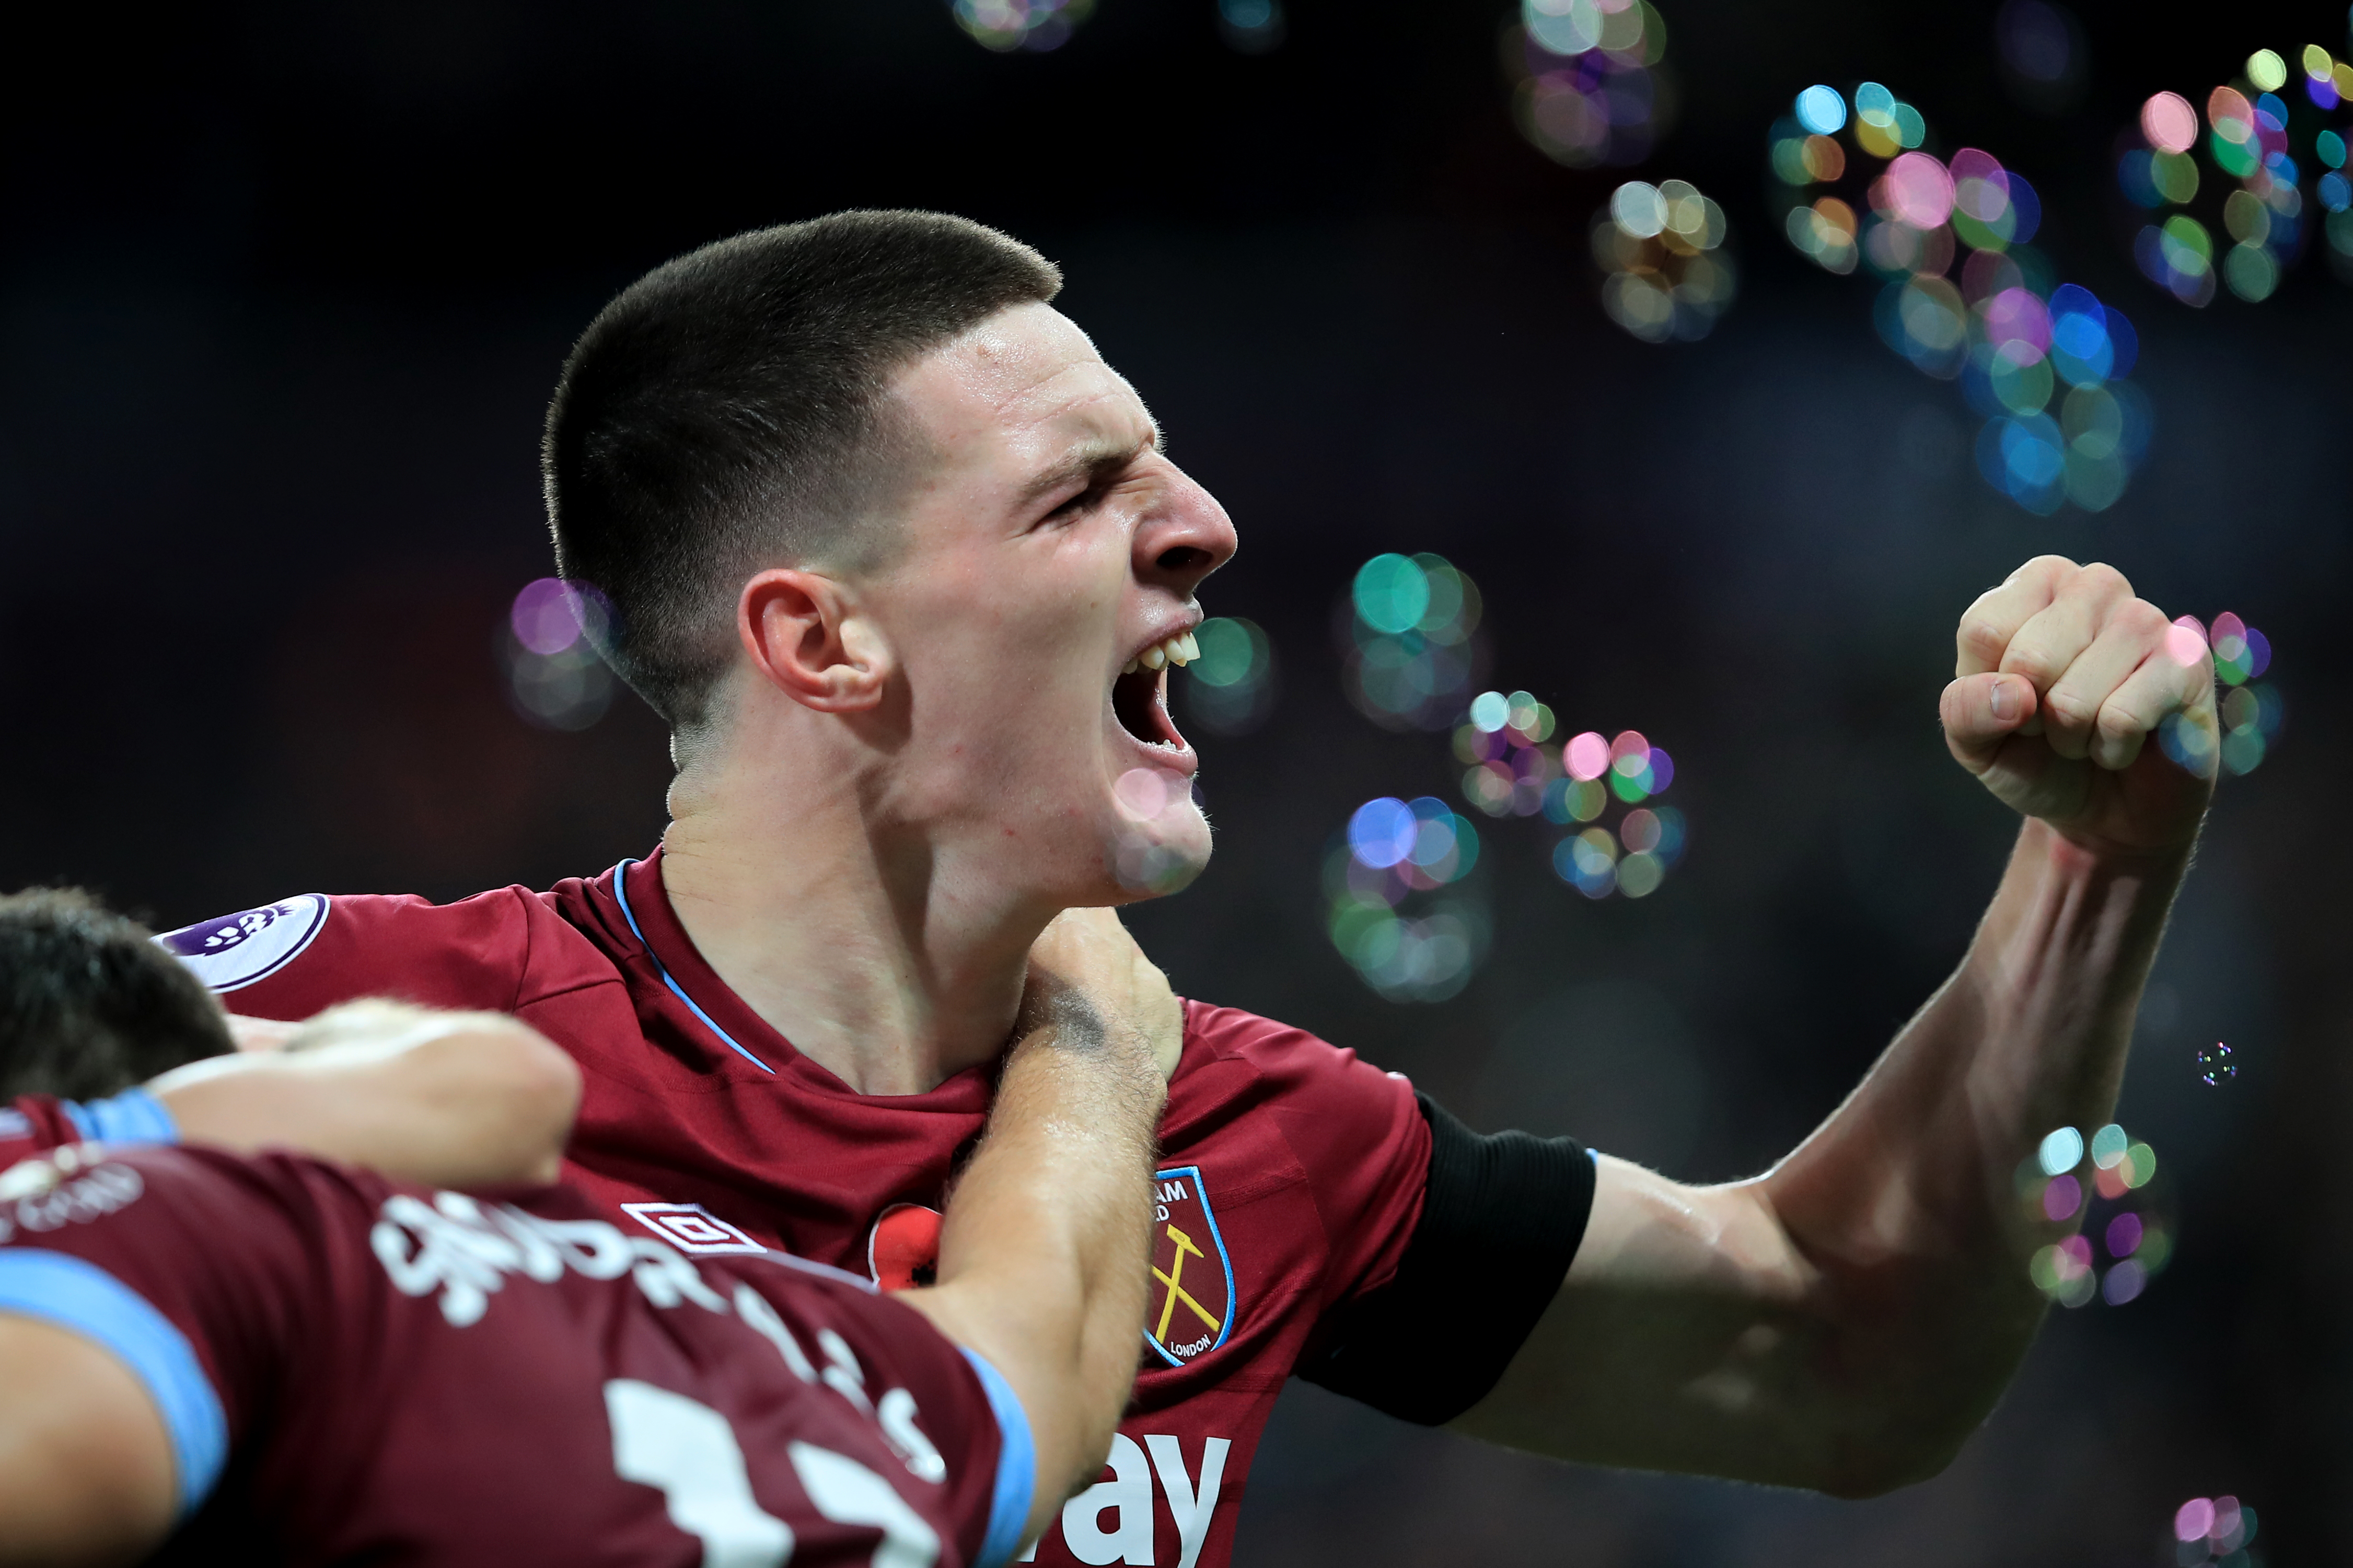 LONDON, ENGLAND - NOVEMBER 03: Declan Rice of West Ham United celebrates during the Premier League match between West Ham United and Burnley FC at London Stadium on November 3, 2018 in London, United Kingdom. (Photo by Marc Atkins/Getty Images)